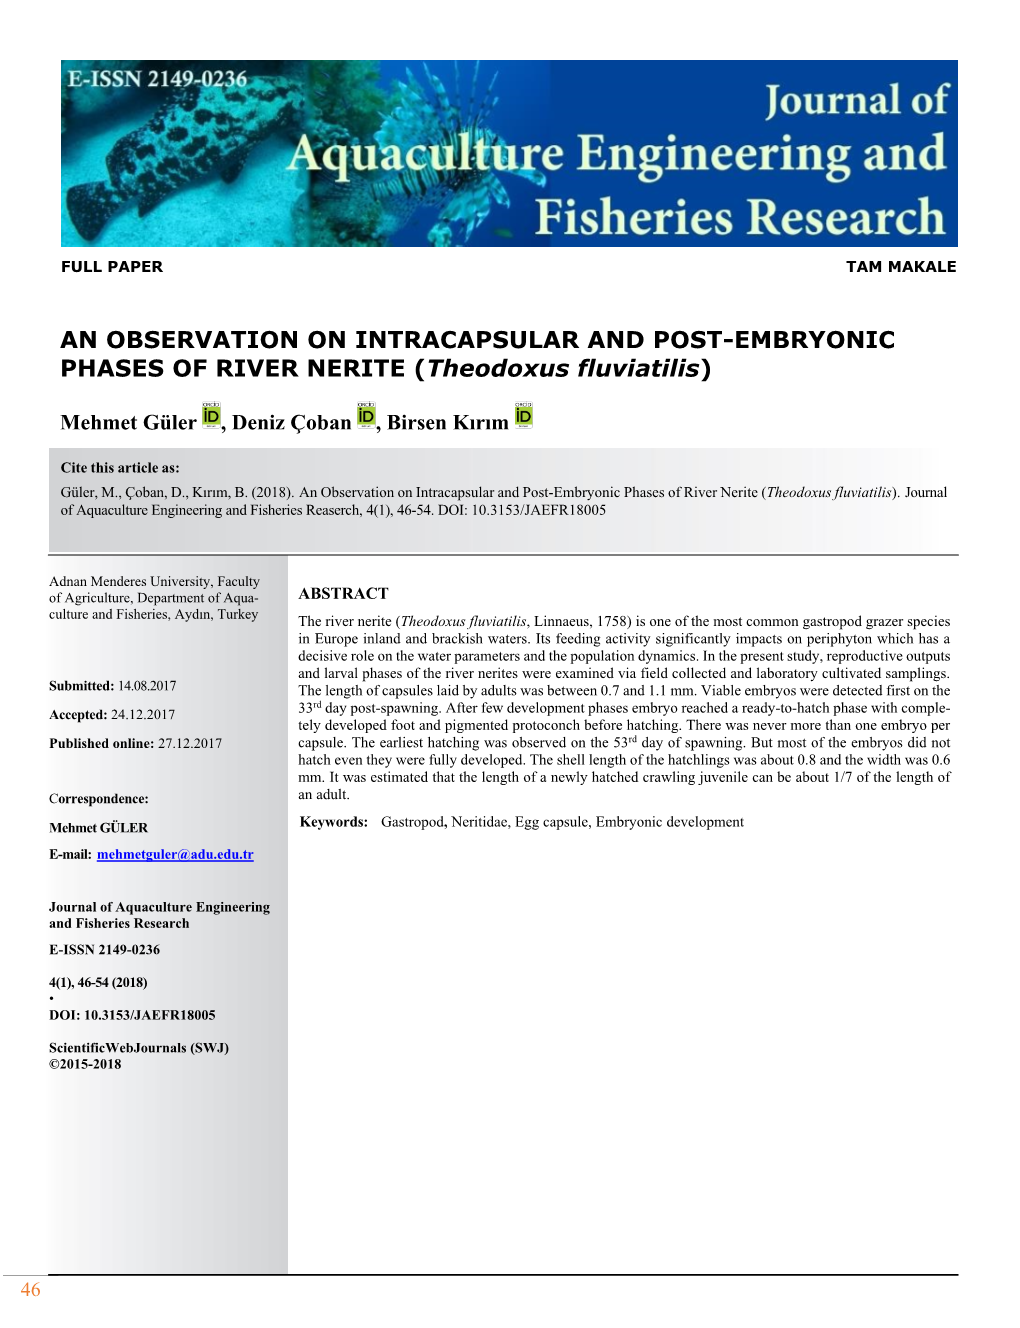 AN OBSERVATION on INTRACAPSULAR and POST-EMBRYONIC PHASES of RIVER NERITE (Theodoxus Fluviatilis)